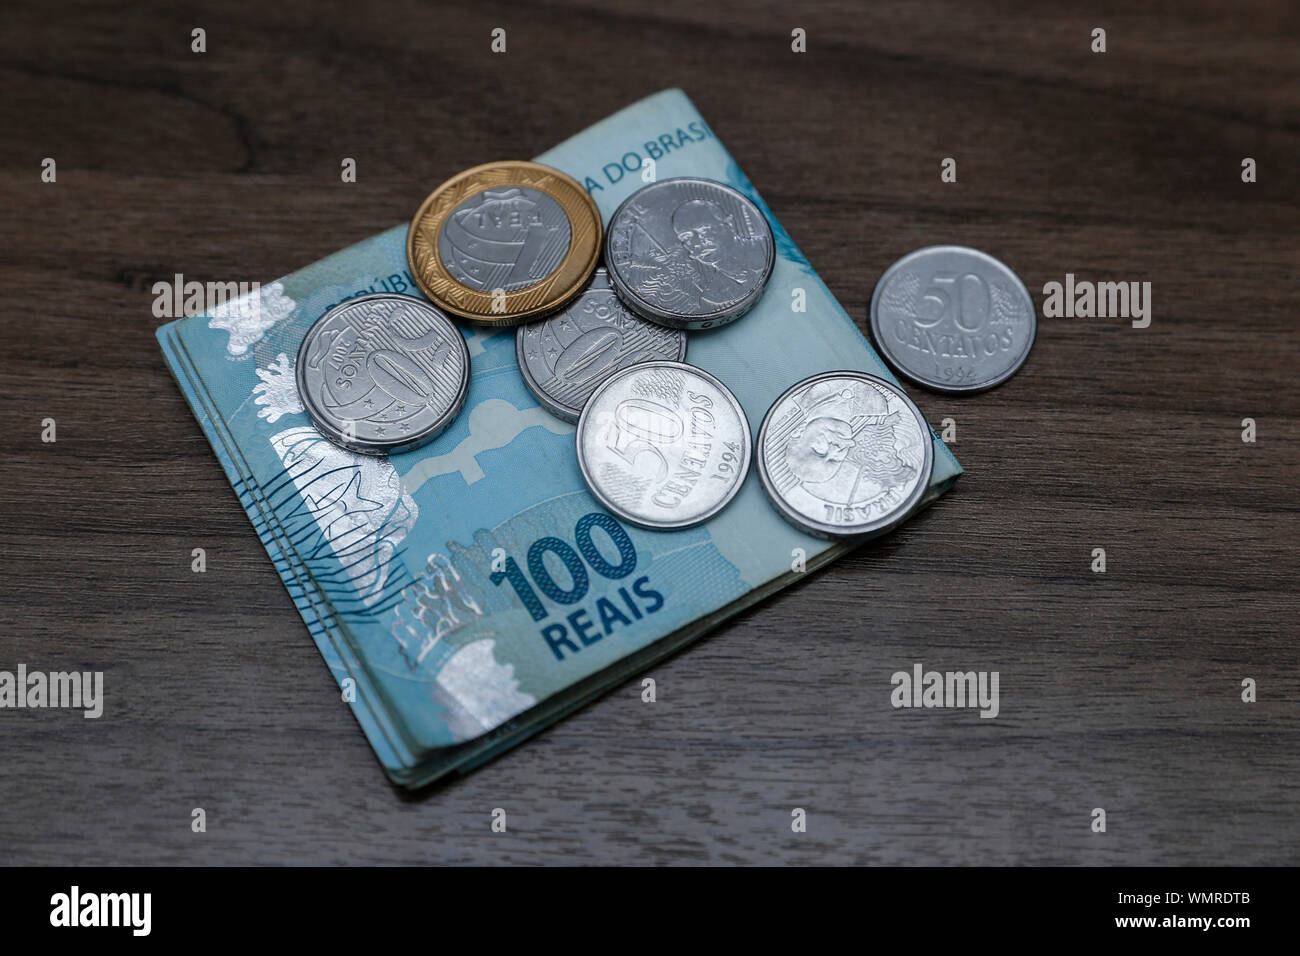 Money from Brazil, notes of Real, Brazil BRL banknote, Brazilian currency, economy and business. Stock Photo